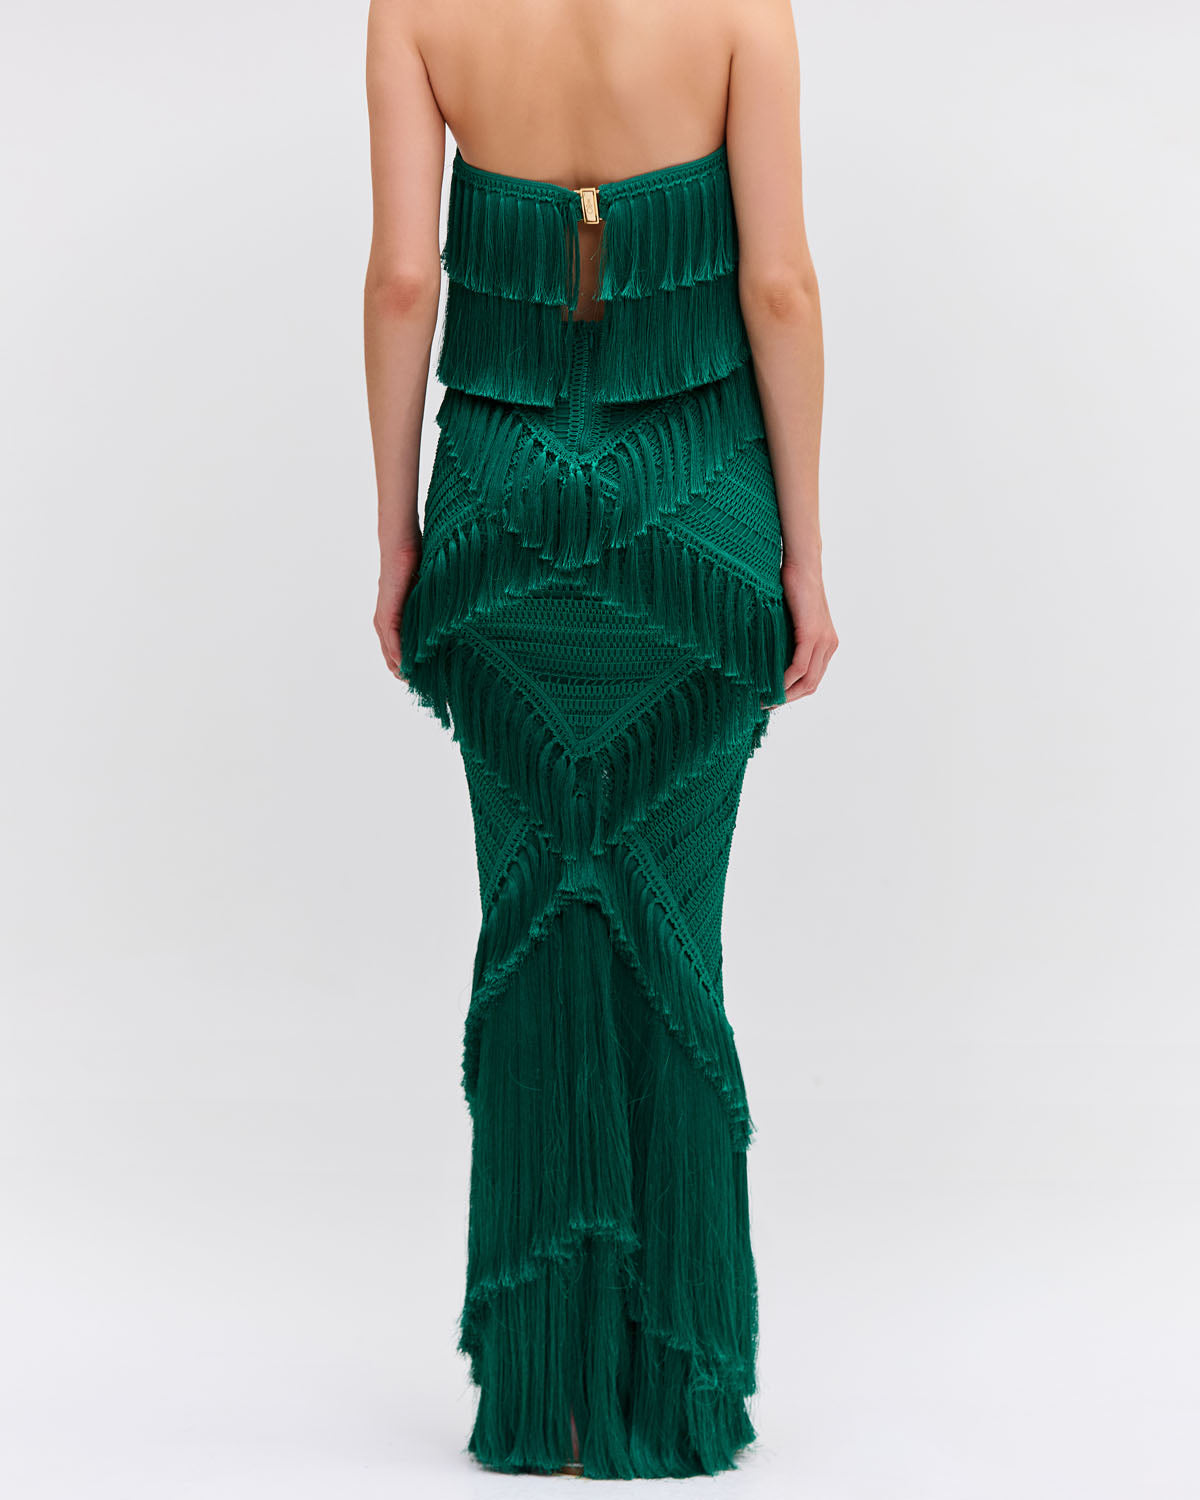 PREORDER: Woven Fringe Trim Maxi Skirt (EXCLUSIVE)